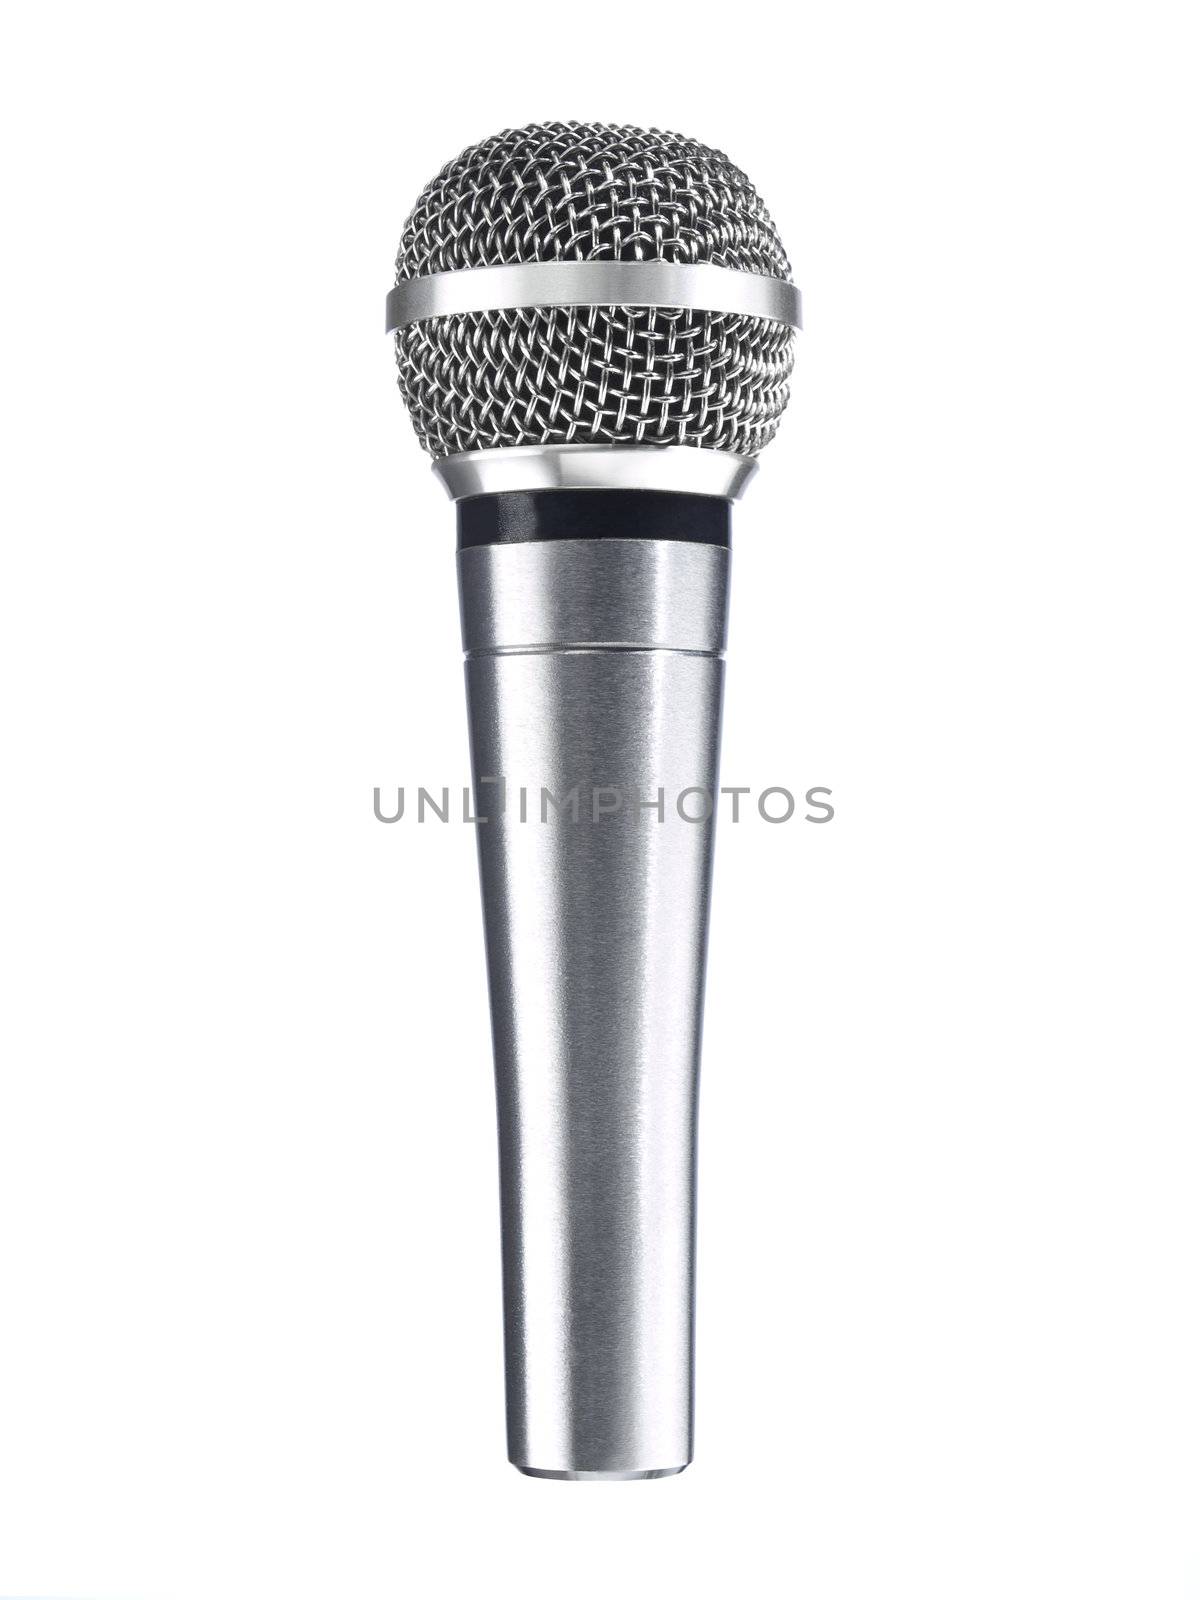 A metallic microphone isolated over a white background.